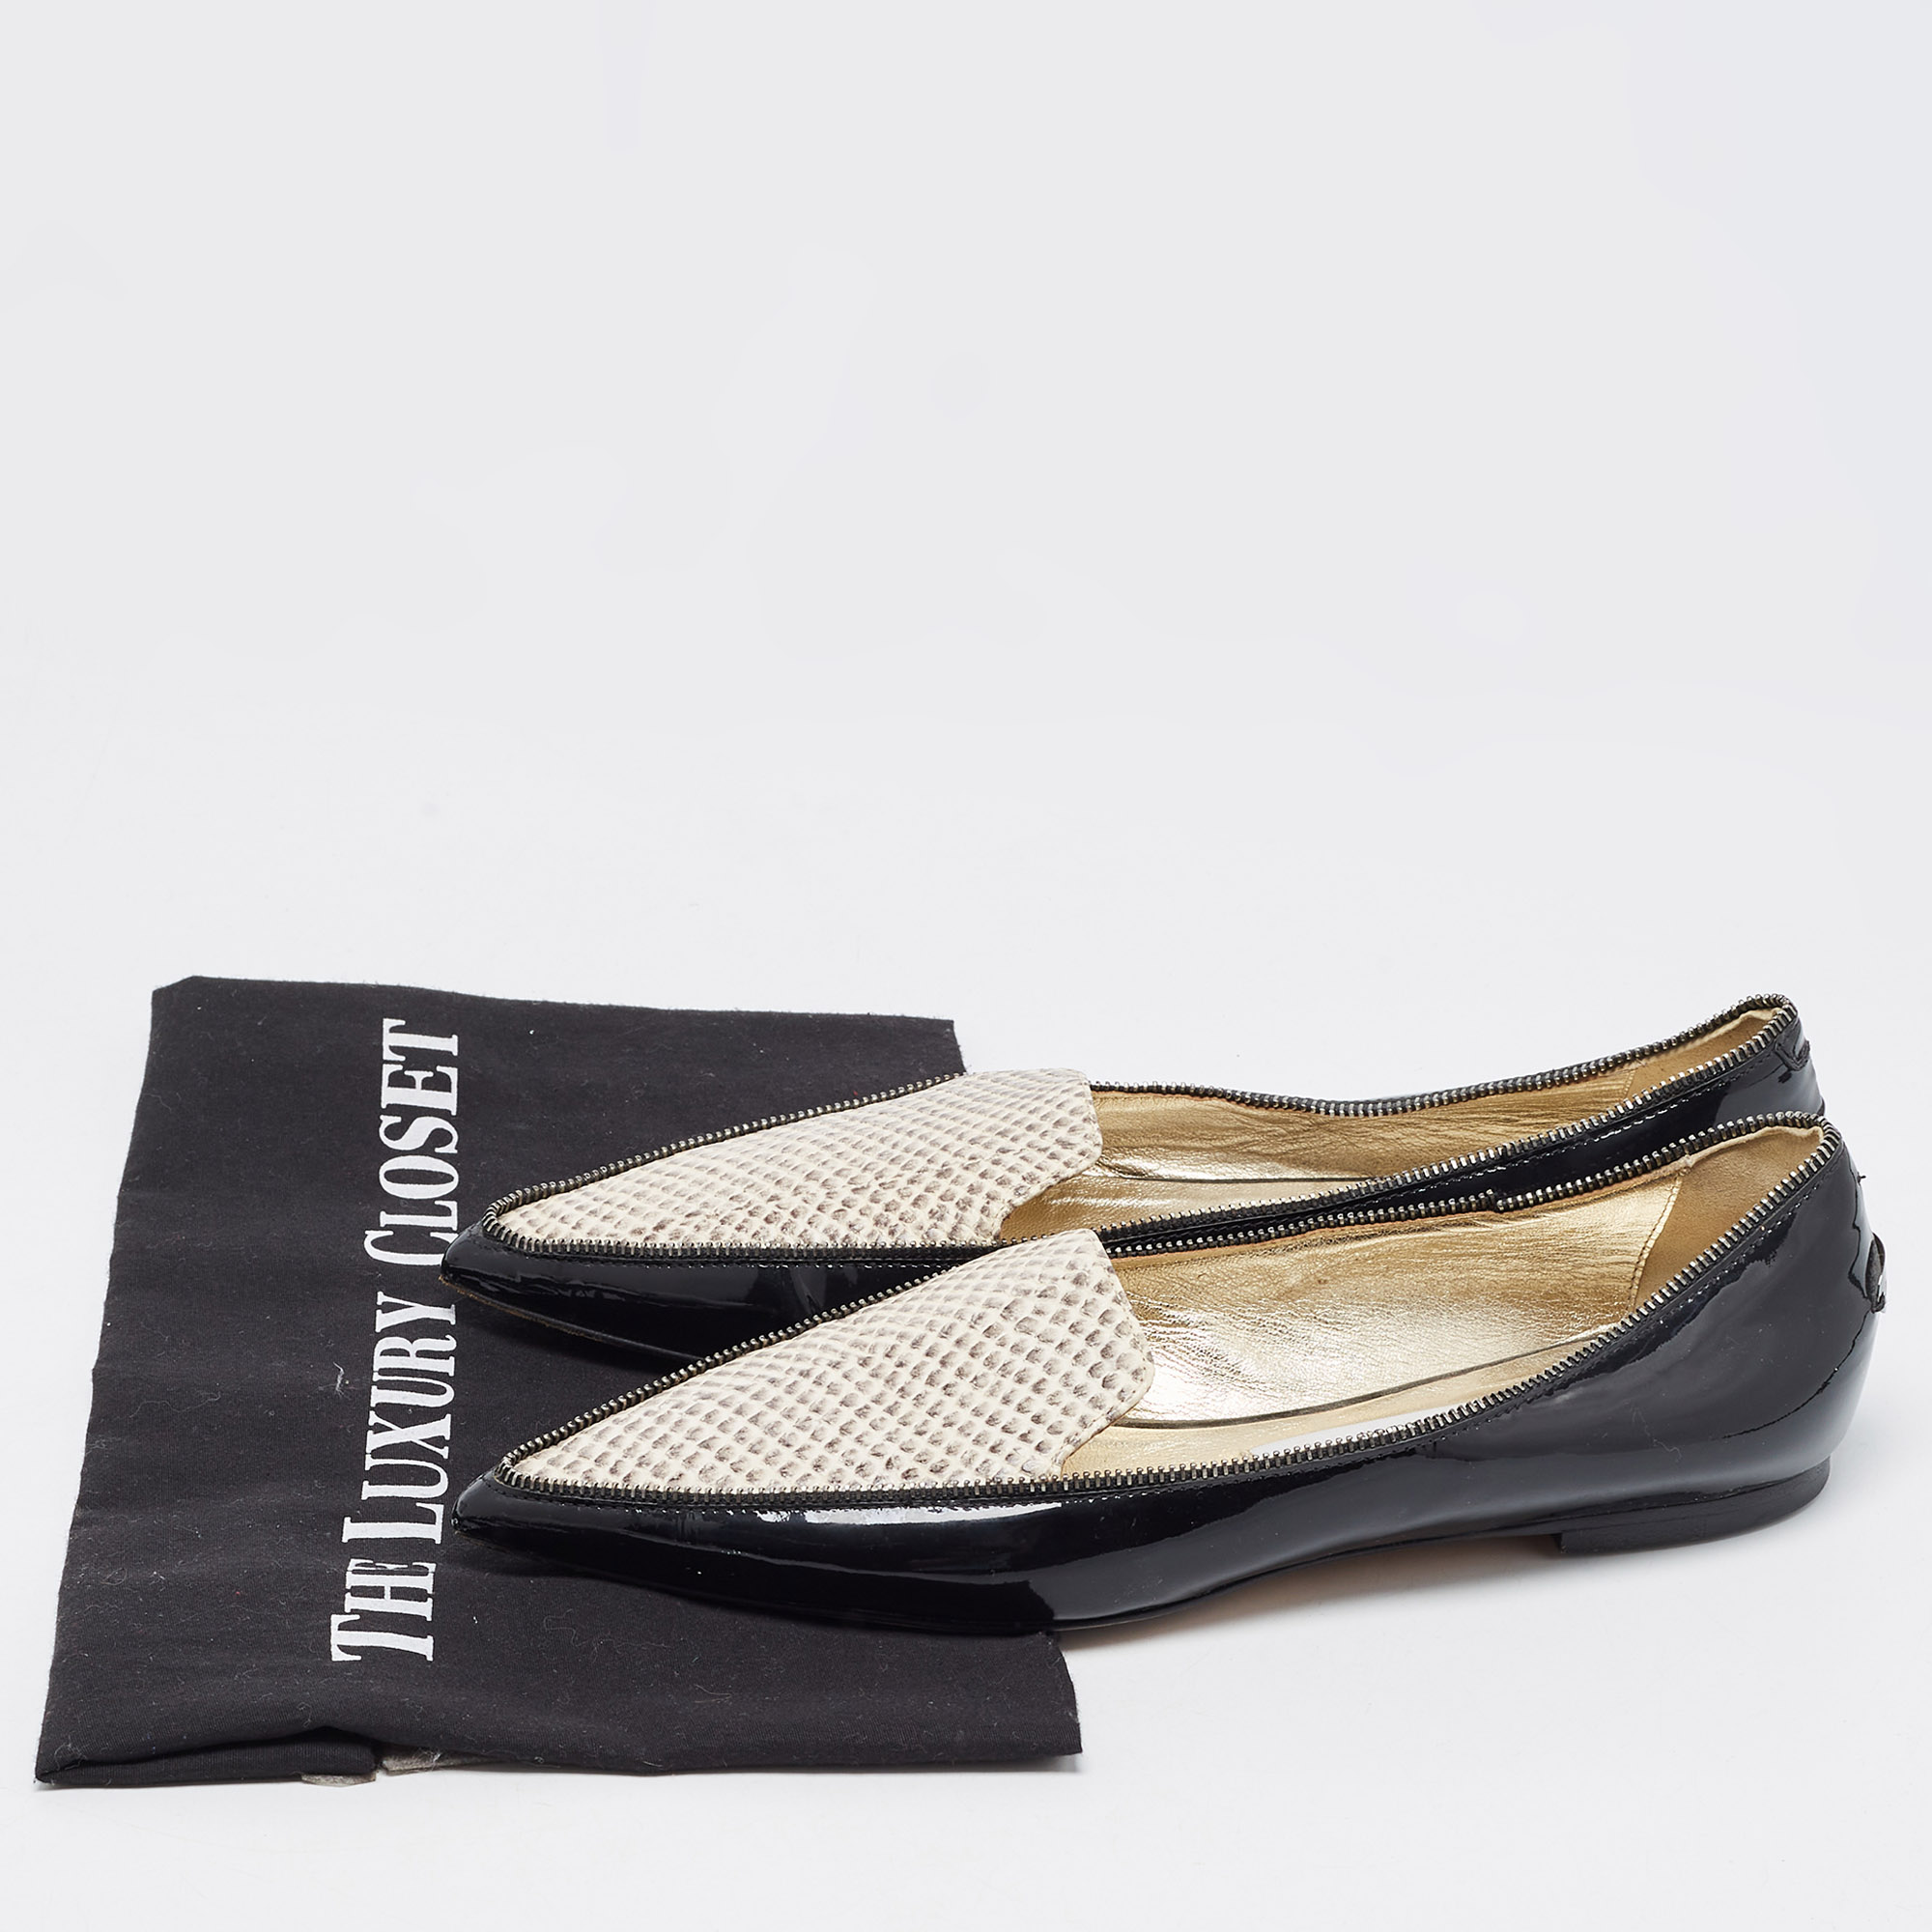 Jimmy Choo Black/Beige Leather And Embossed Python Pointed Toe Smoking Slippers Size 36.5